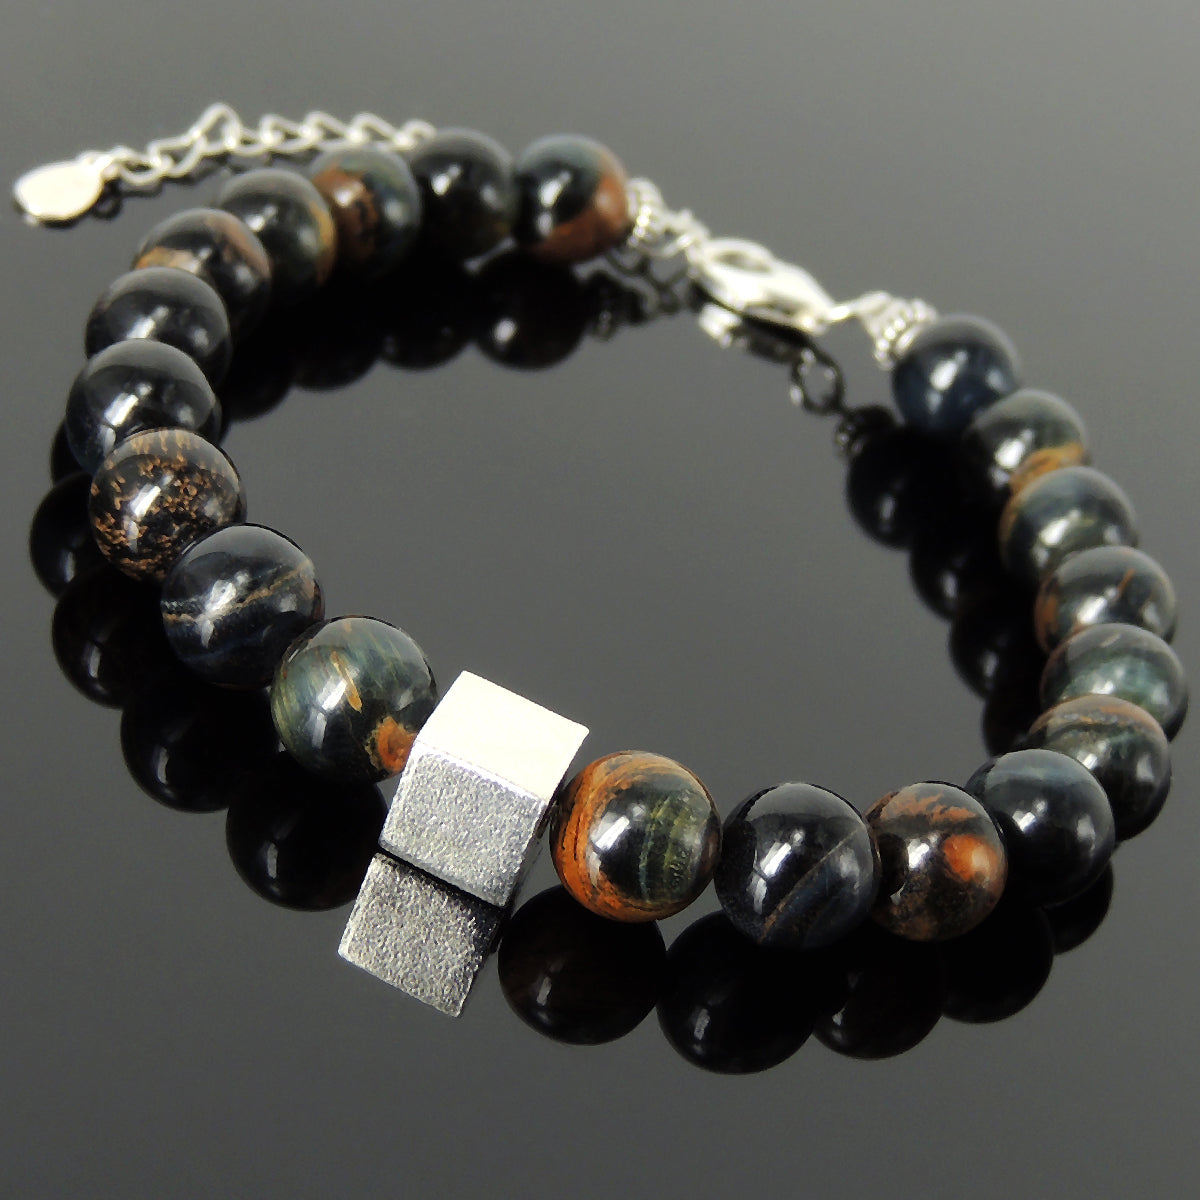 8mm Rare Mixed Blue Tiger Eye Healing Gemstone Bracelet with Minimal Geometric Balance Cube S925 Sterling Silver Chain & Clasp - Handmade by Gem & Silver BR1430